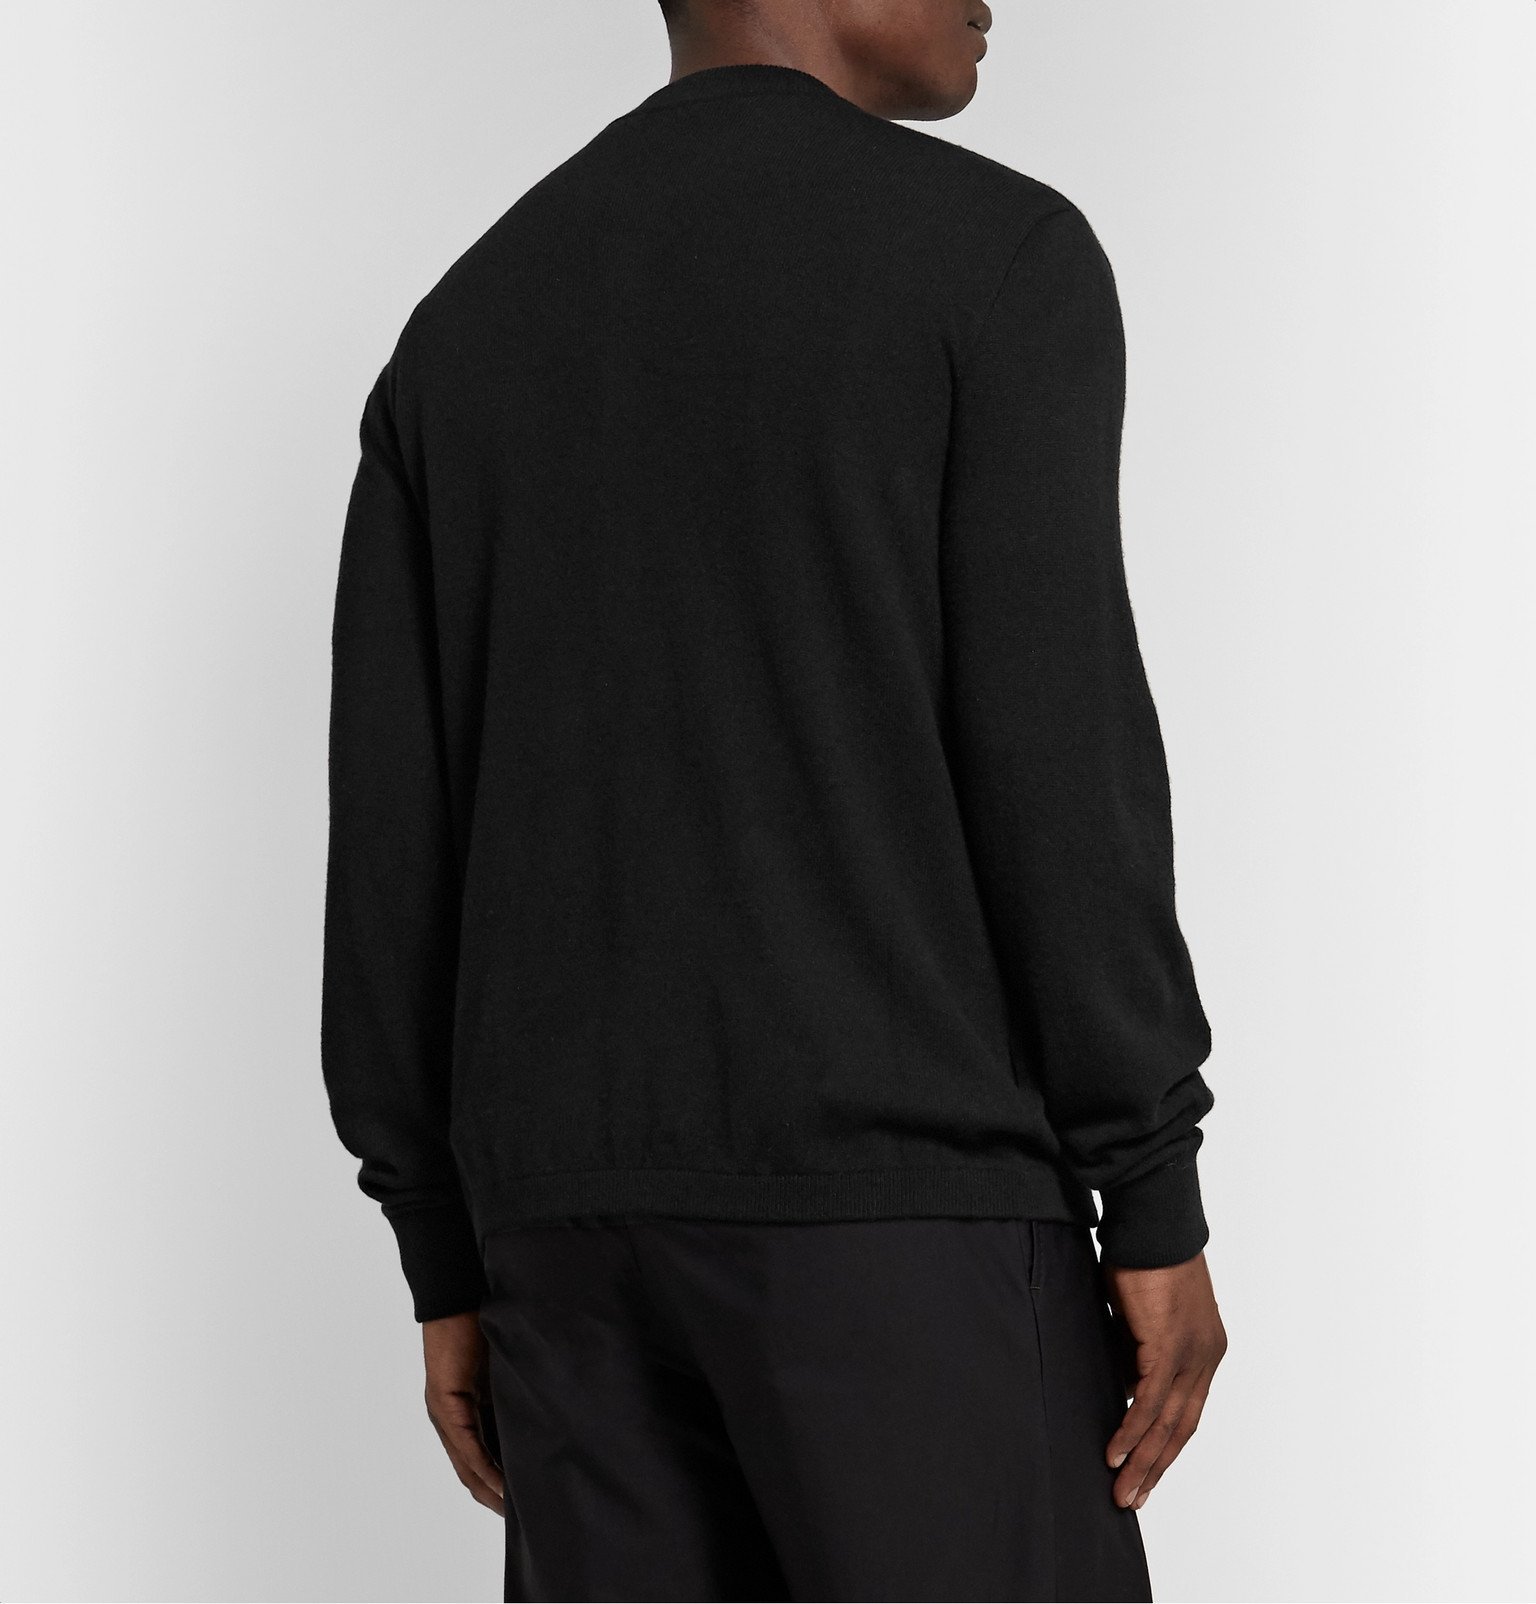 The Row - Wes Cashmere Cardigan - Black The Row